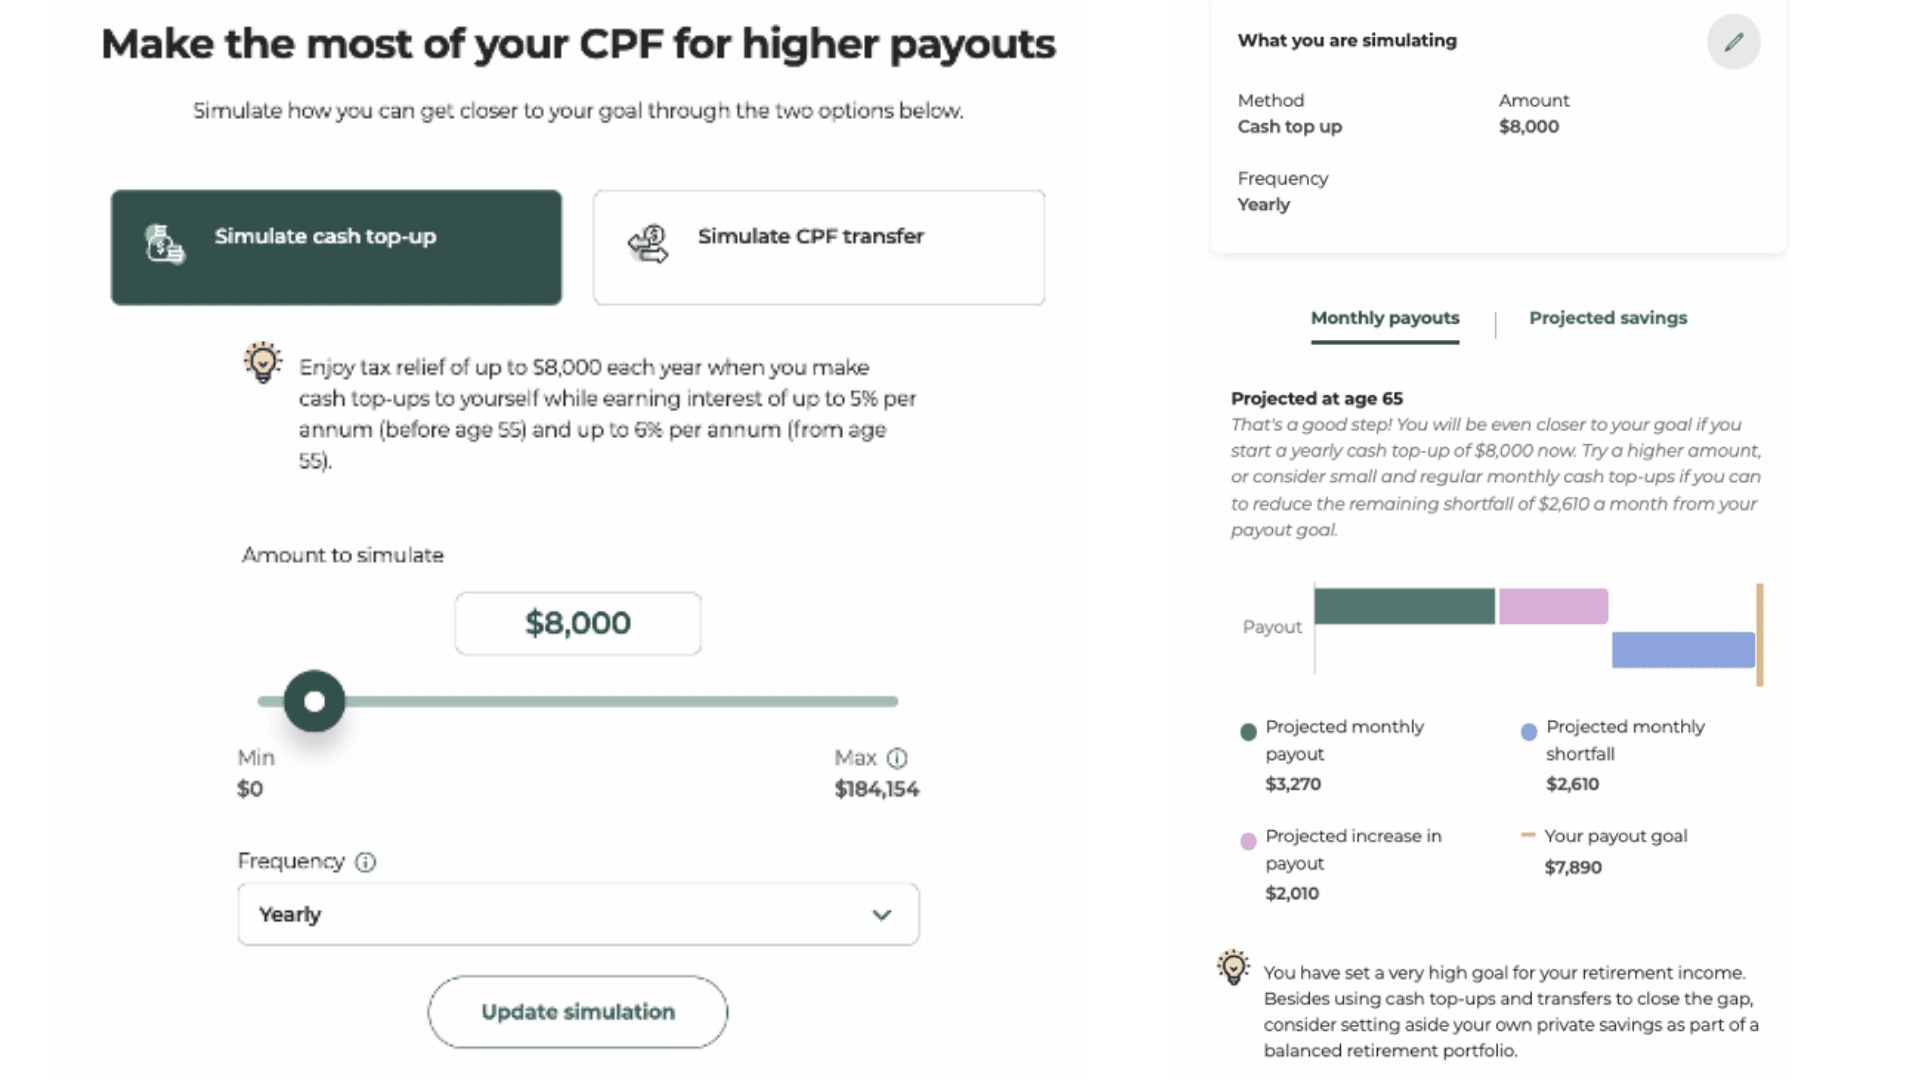 CPF retirement simulate cash top up